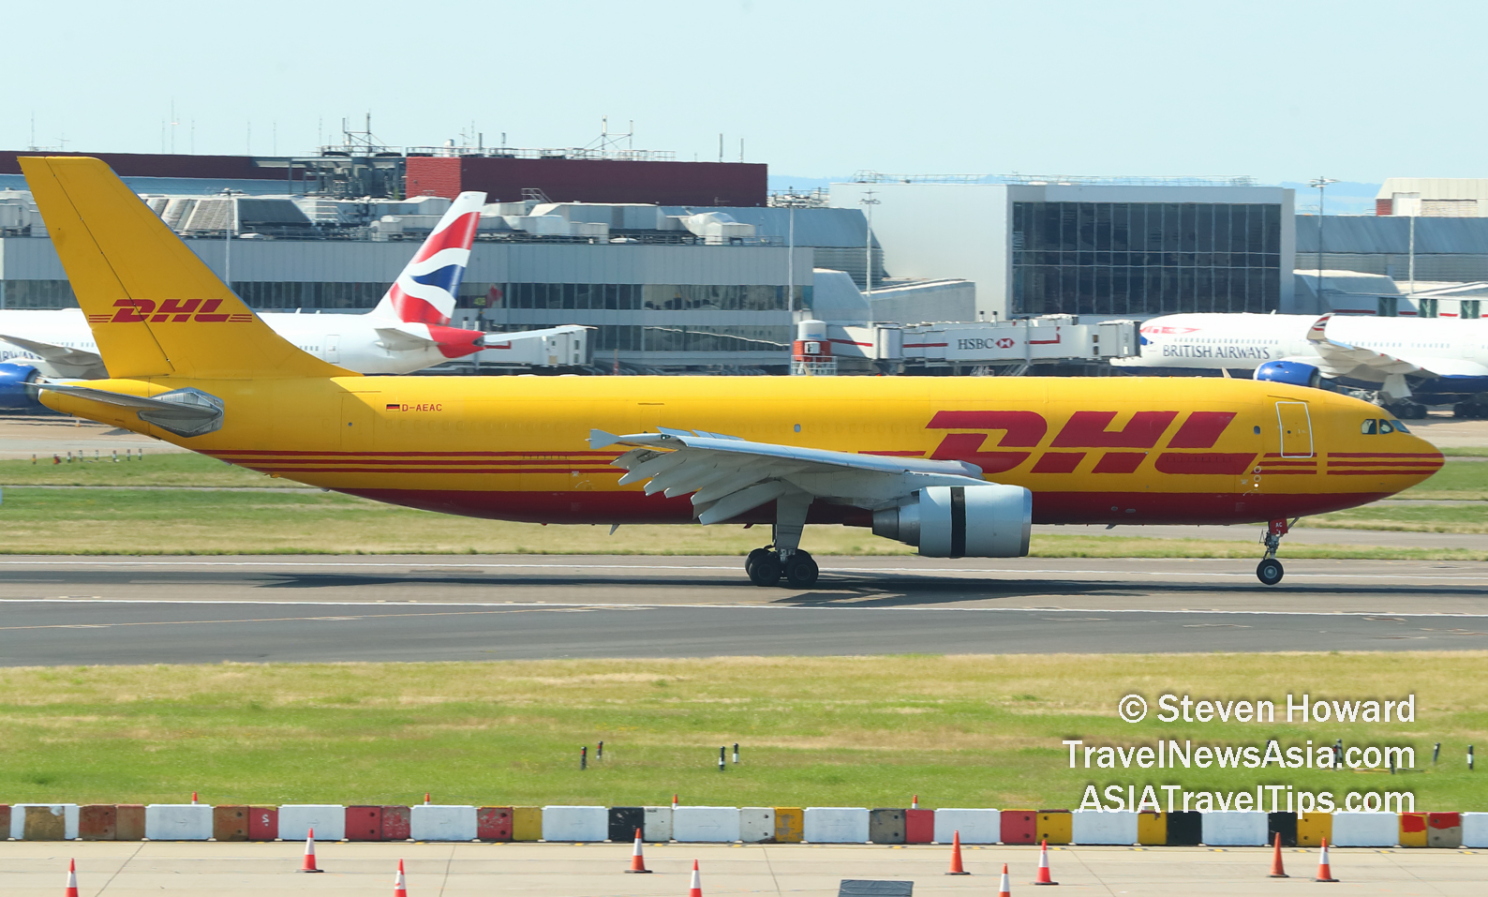 DHL Airbus A330 reg: D-AEAC at London Heathrow (LHR) in July 2021. Picture by Steven Howard of TravelNewsAsia.com Click to enlarge.